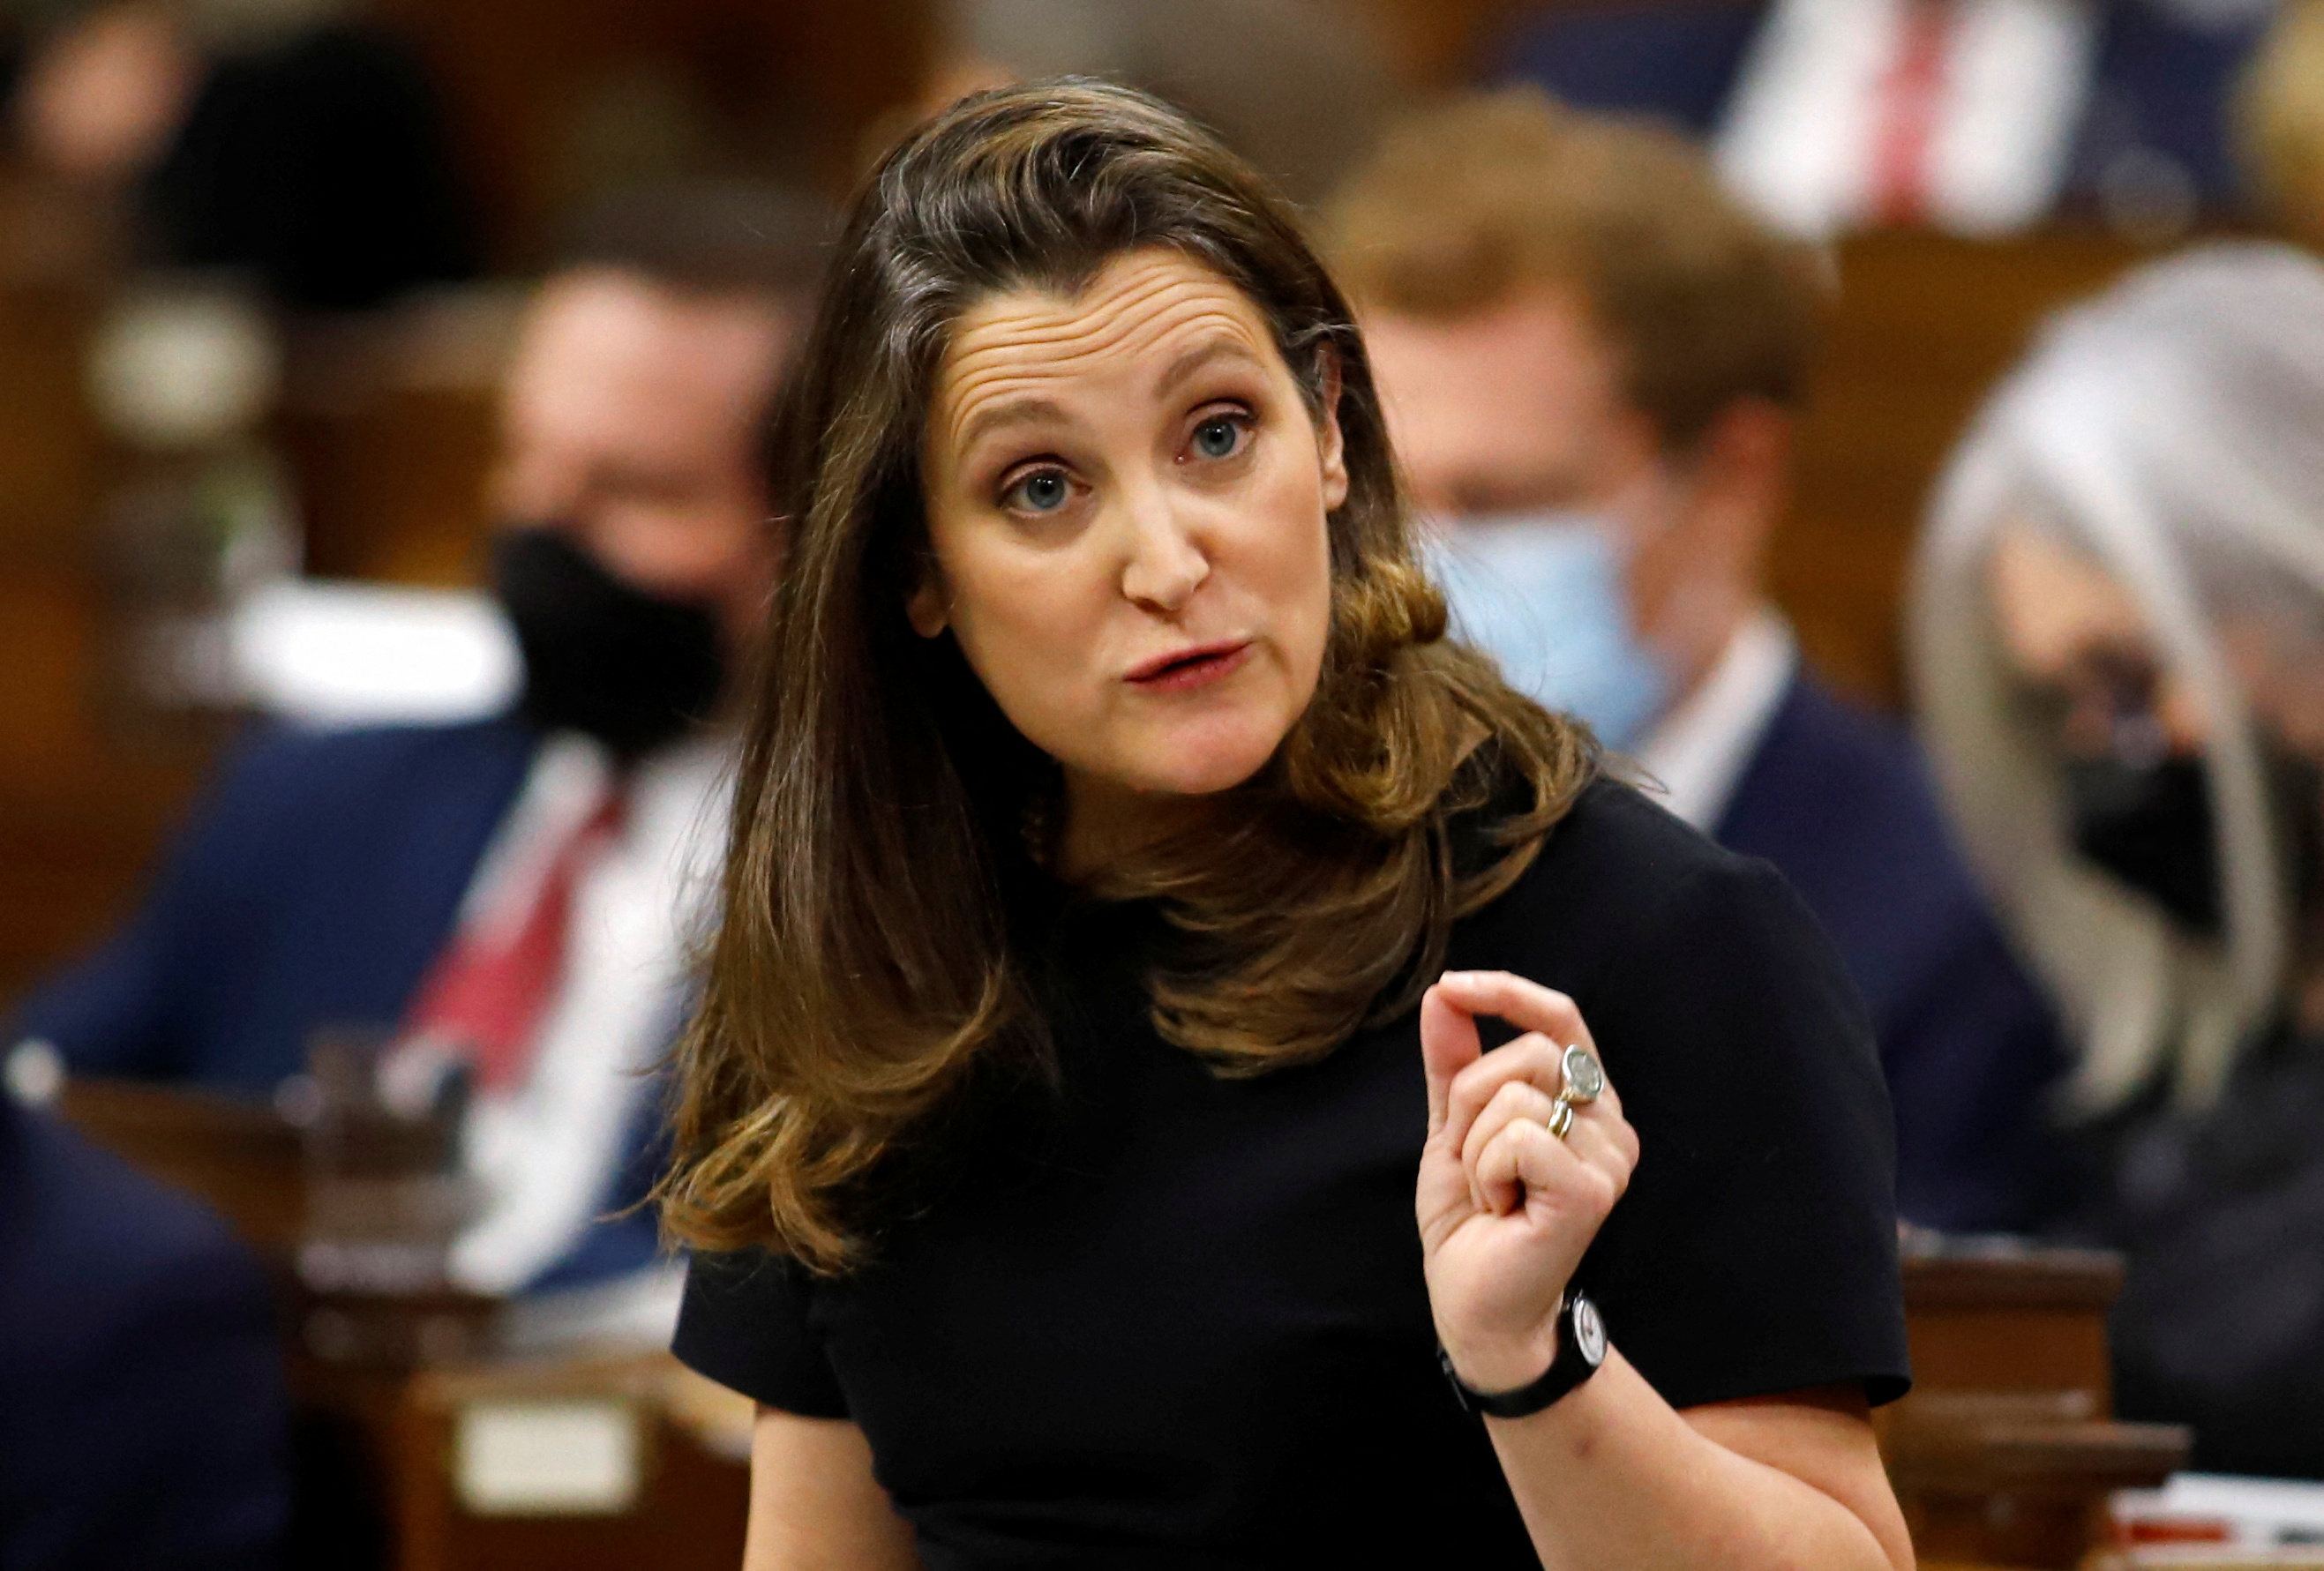 Canada and its allies boycotted Russia at the G20 due to the Ukraine conflict: Freeland